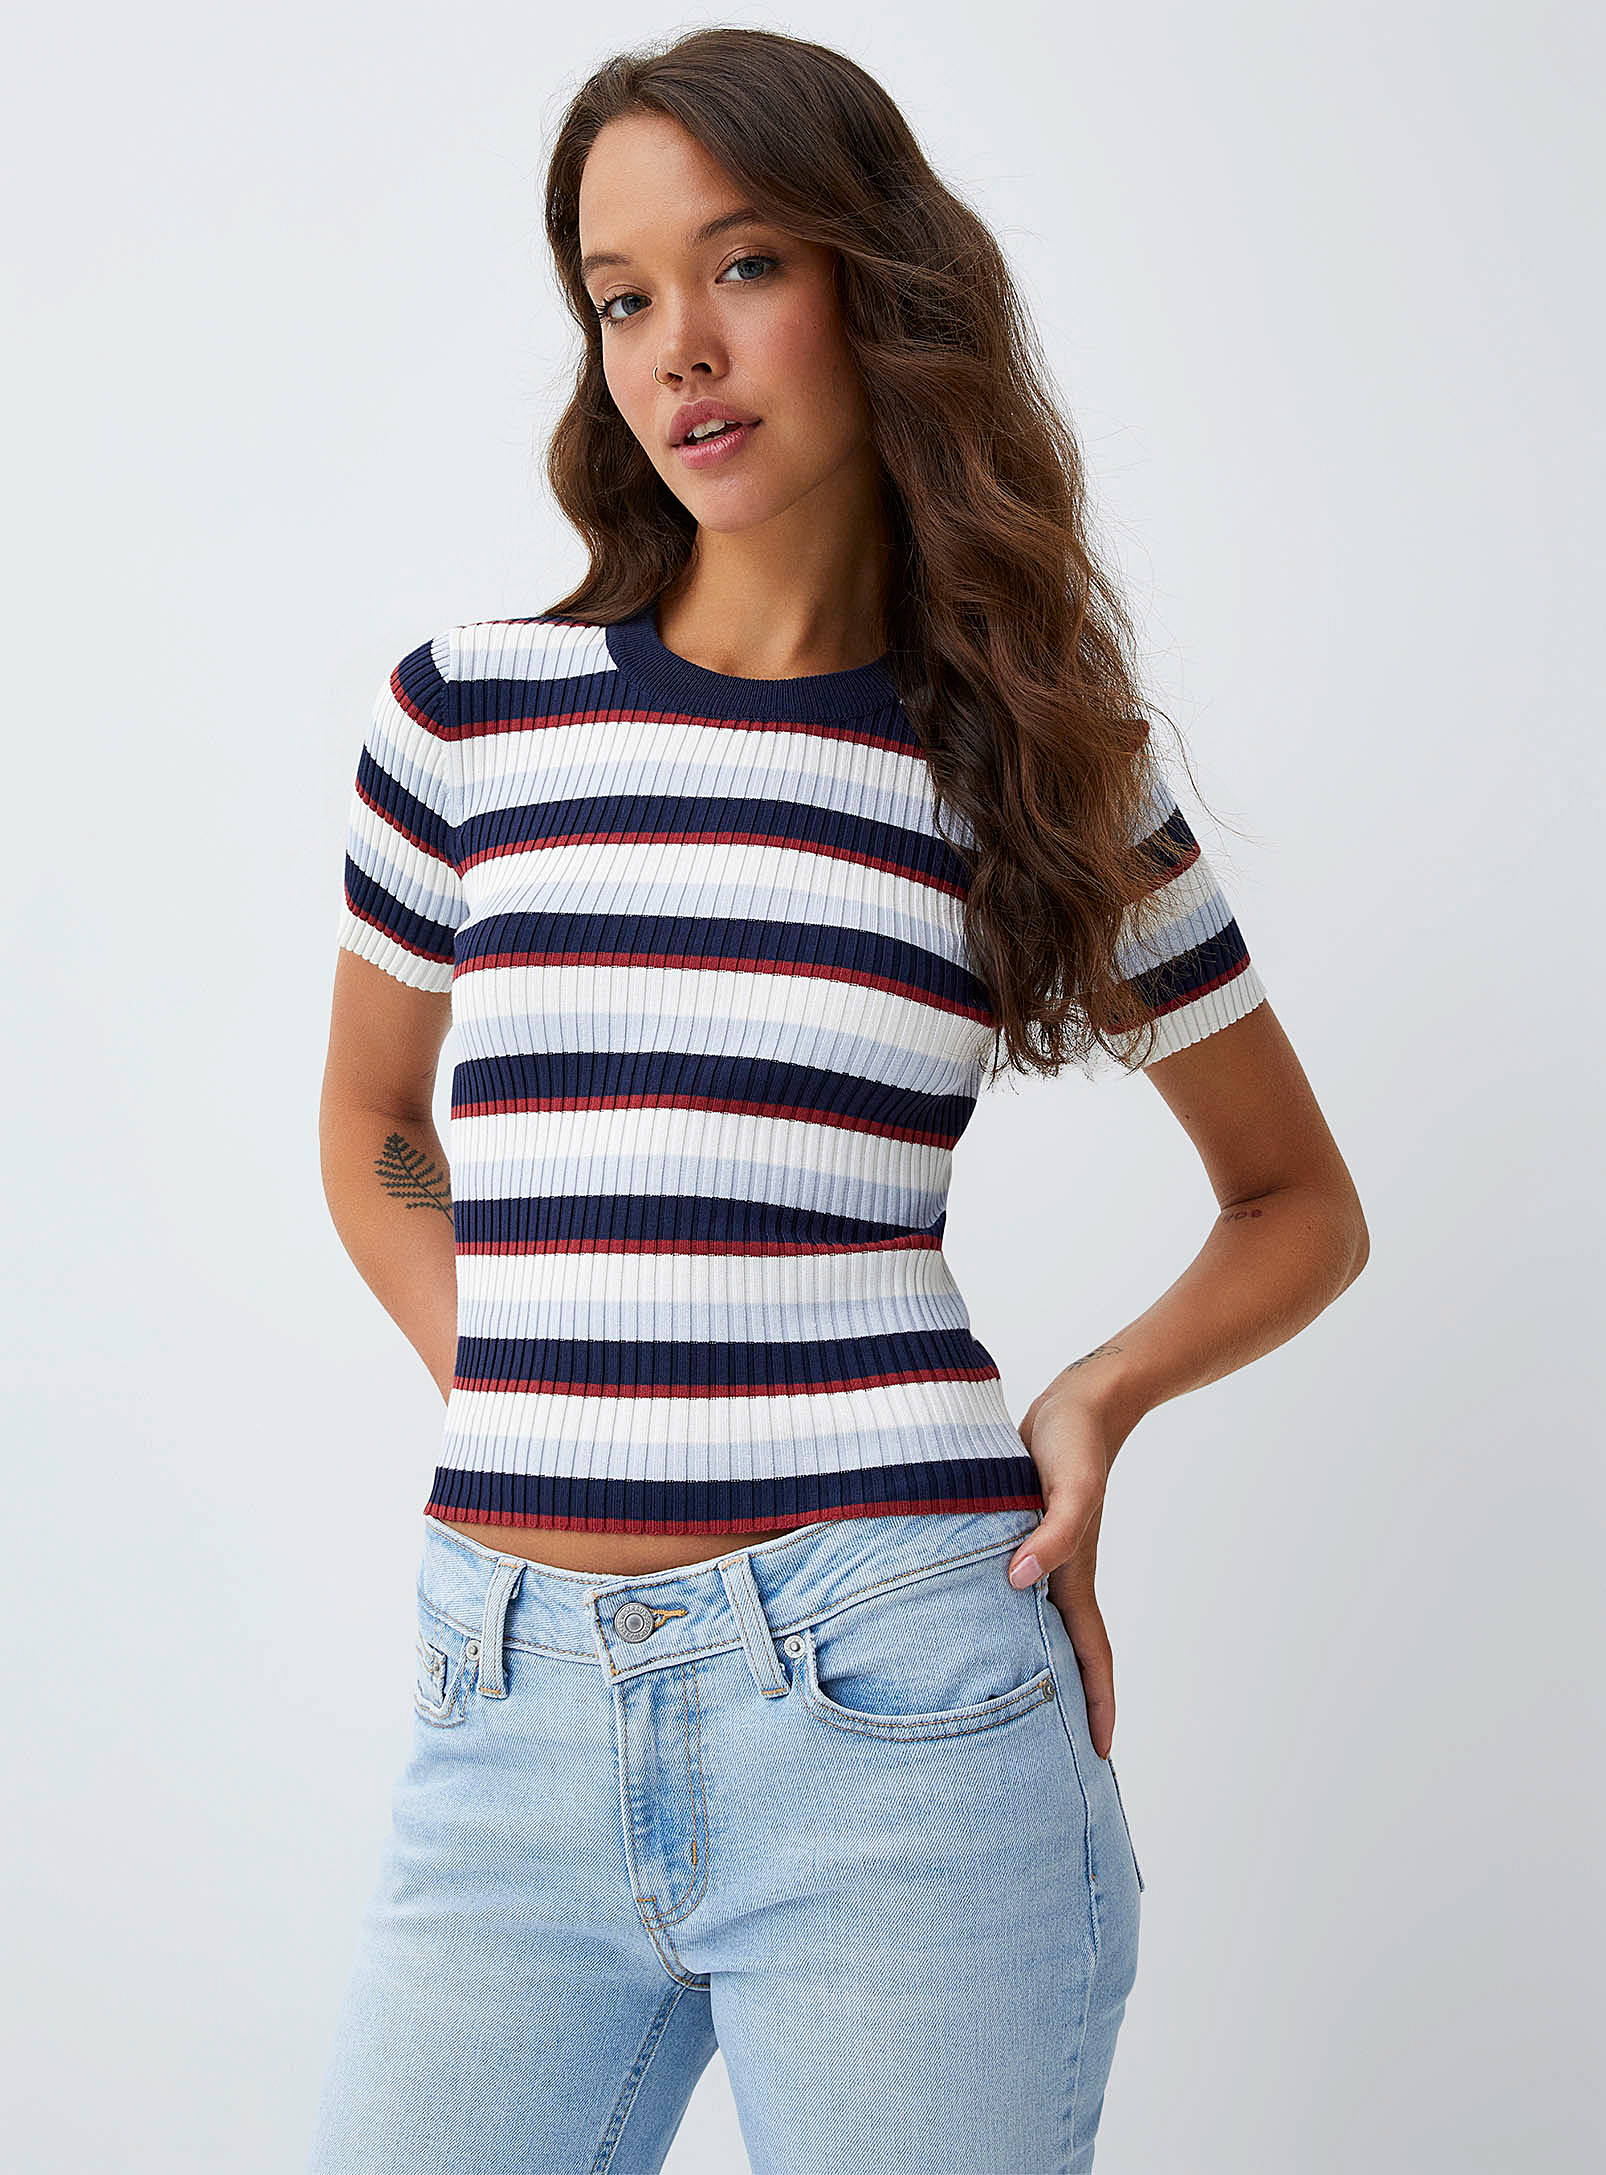 Twik - Women's Ribbed fitted sweater